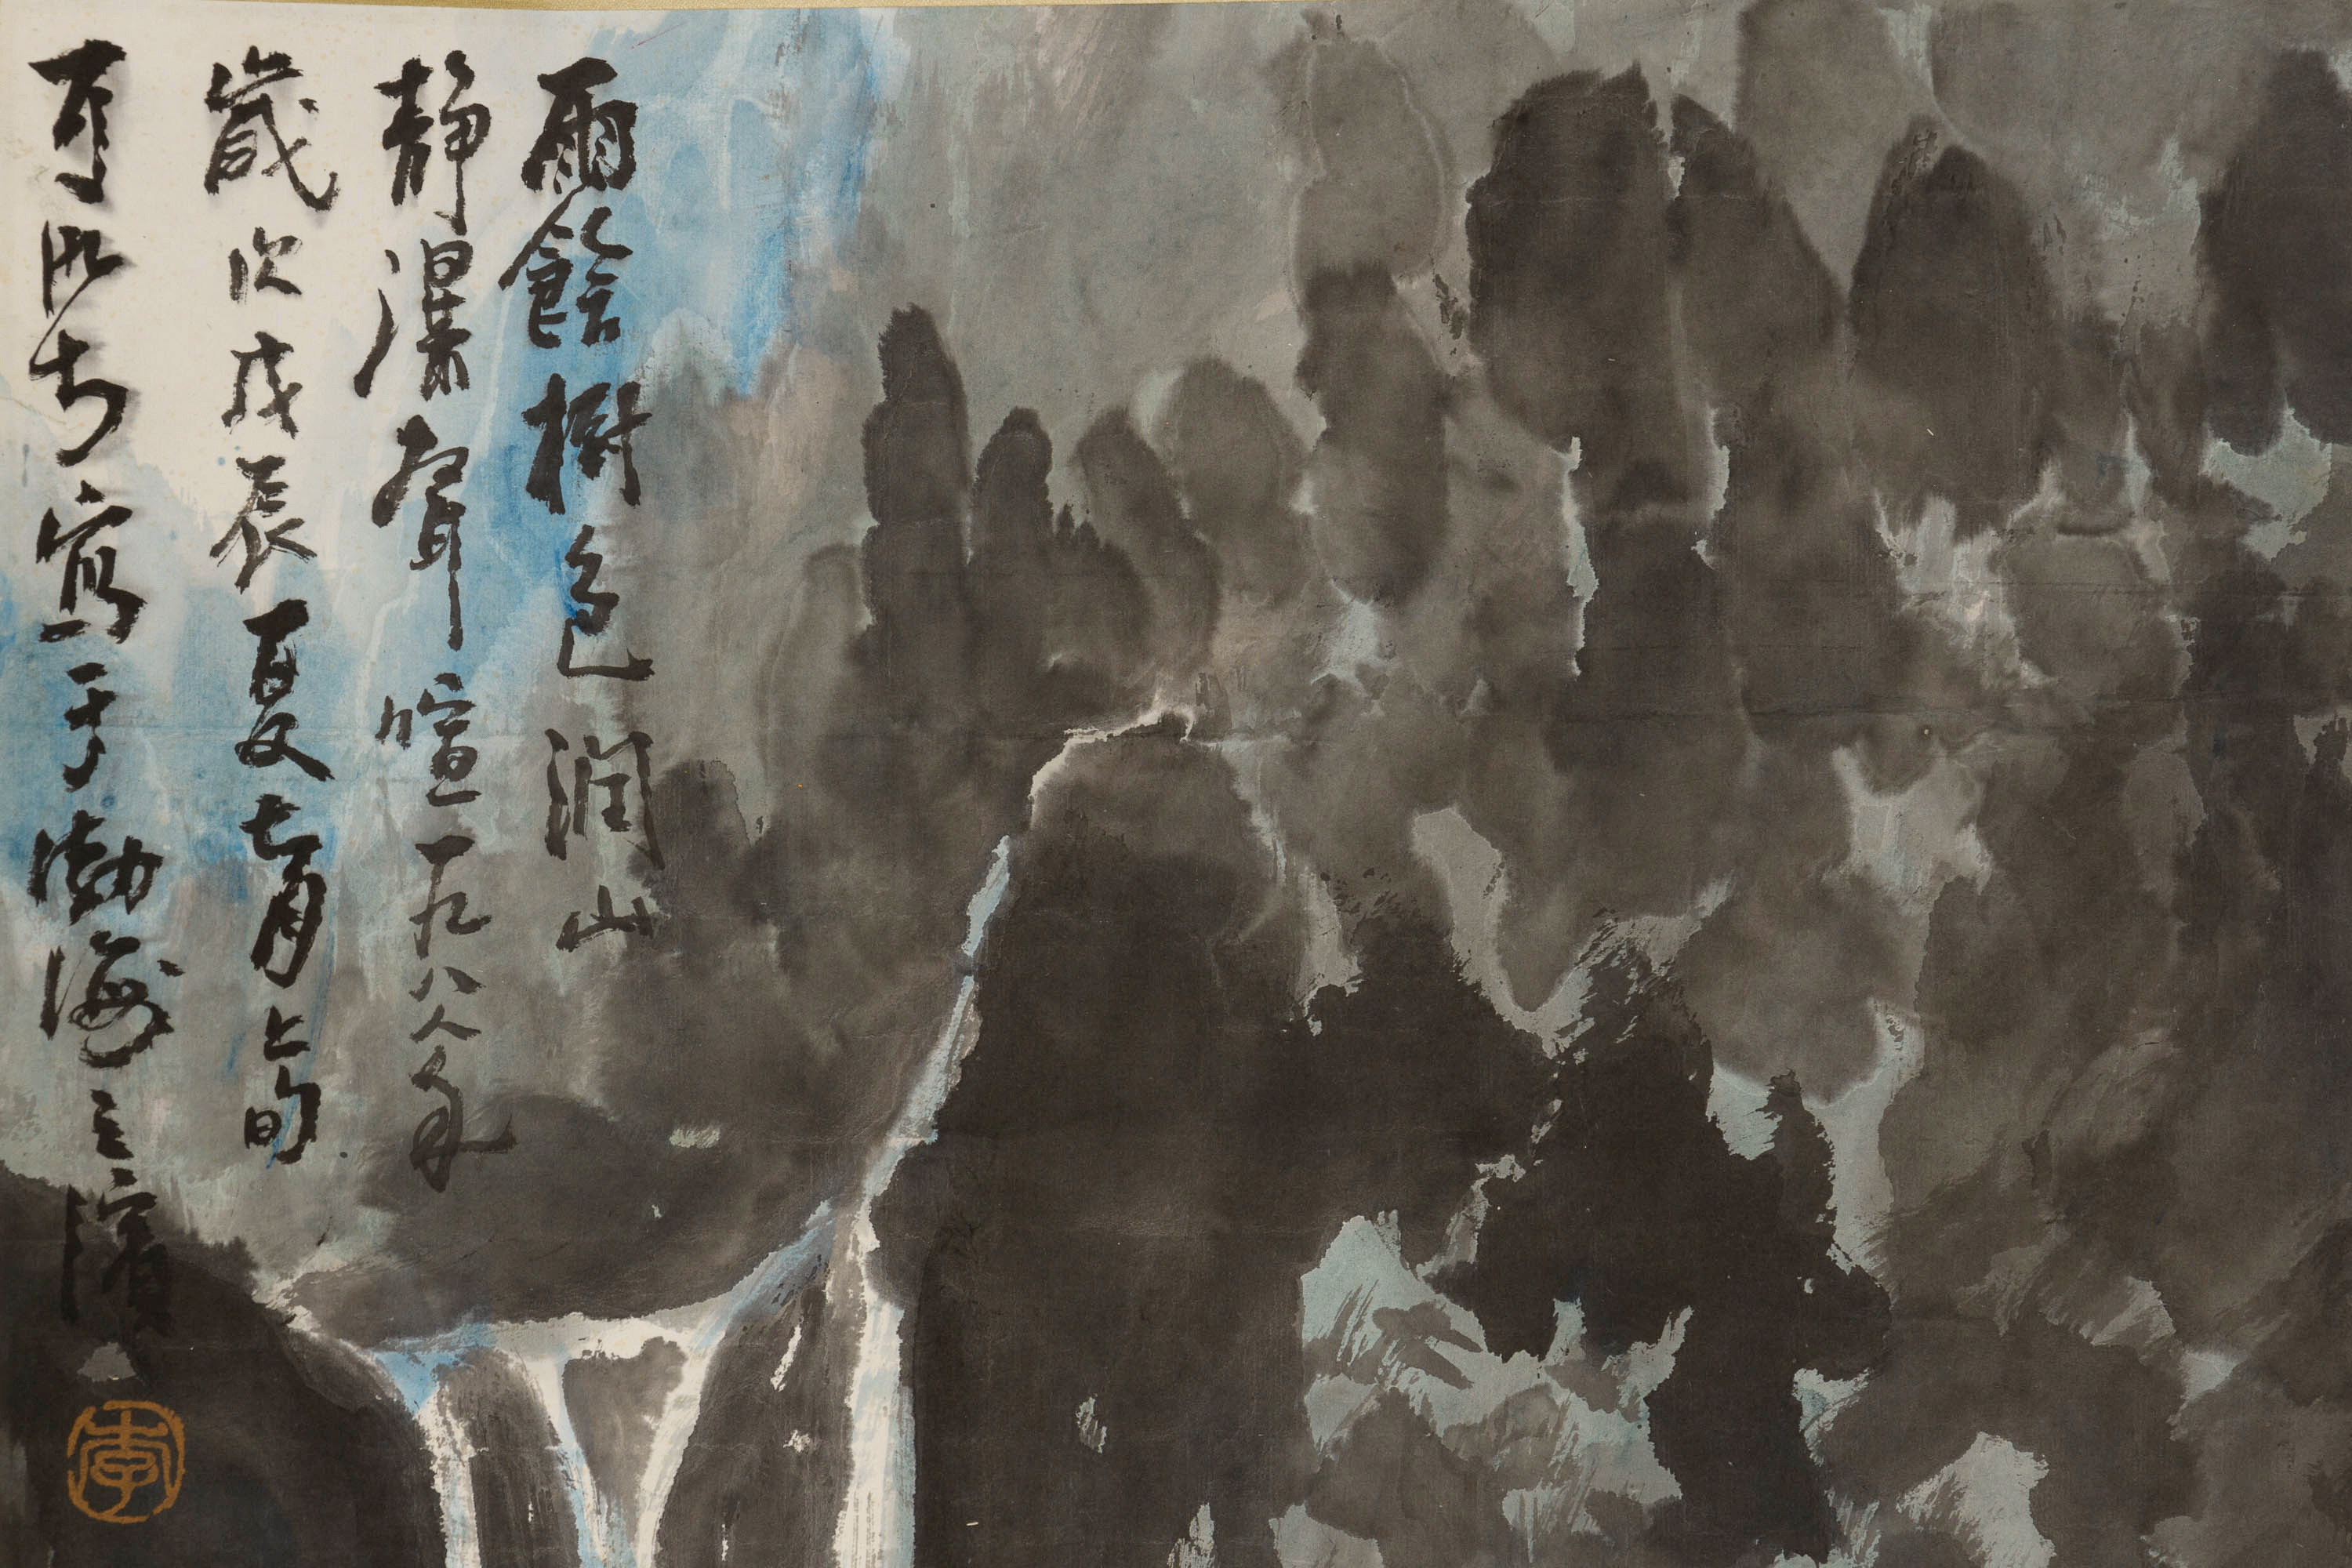 A CHINESE LANDSCAPE SCROLL IN THE STYLE OF LI KERAN - Image 3 of 3